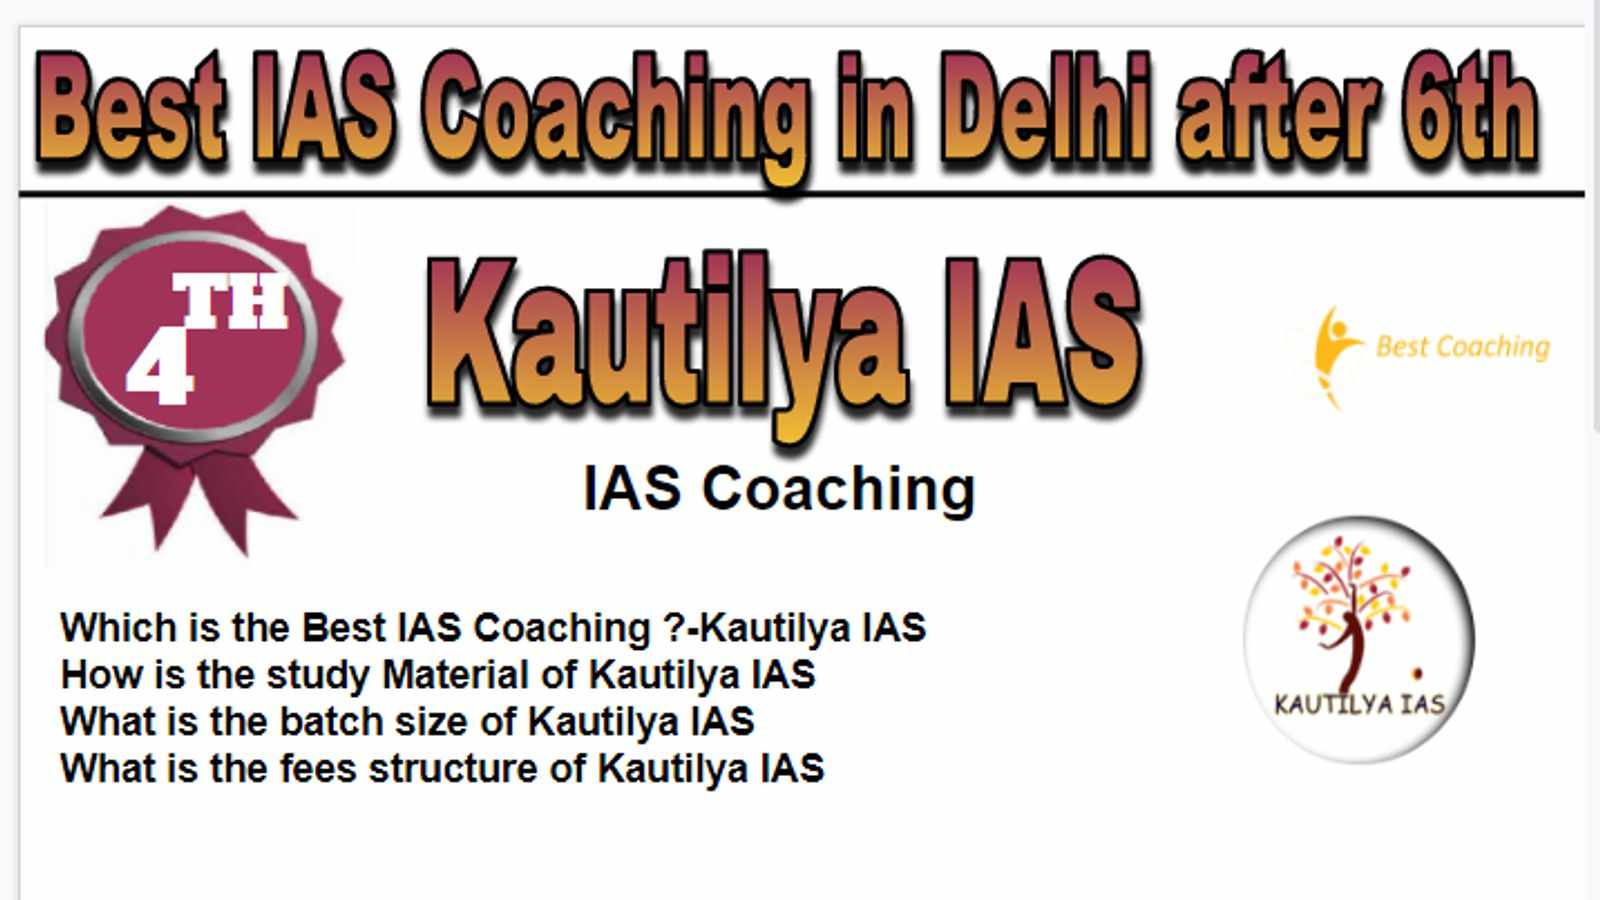 Rank 4 Best IAS coaching in Delhi after 6th